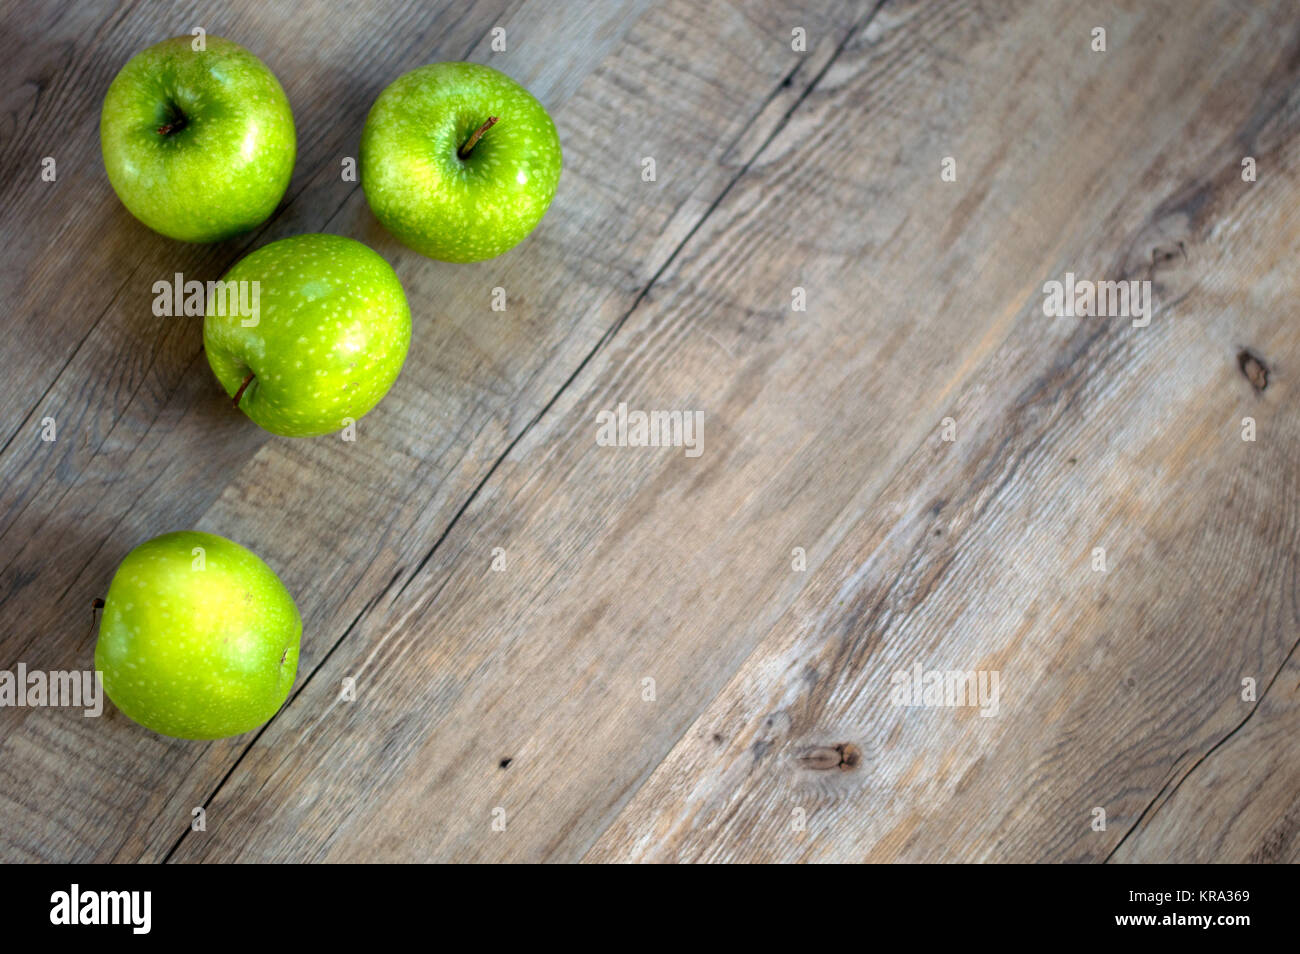 Granny Smith apples on a wooden background Stock Photo